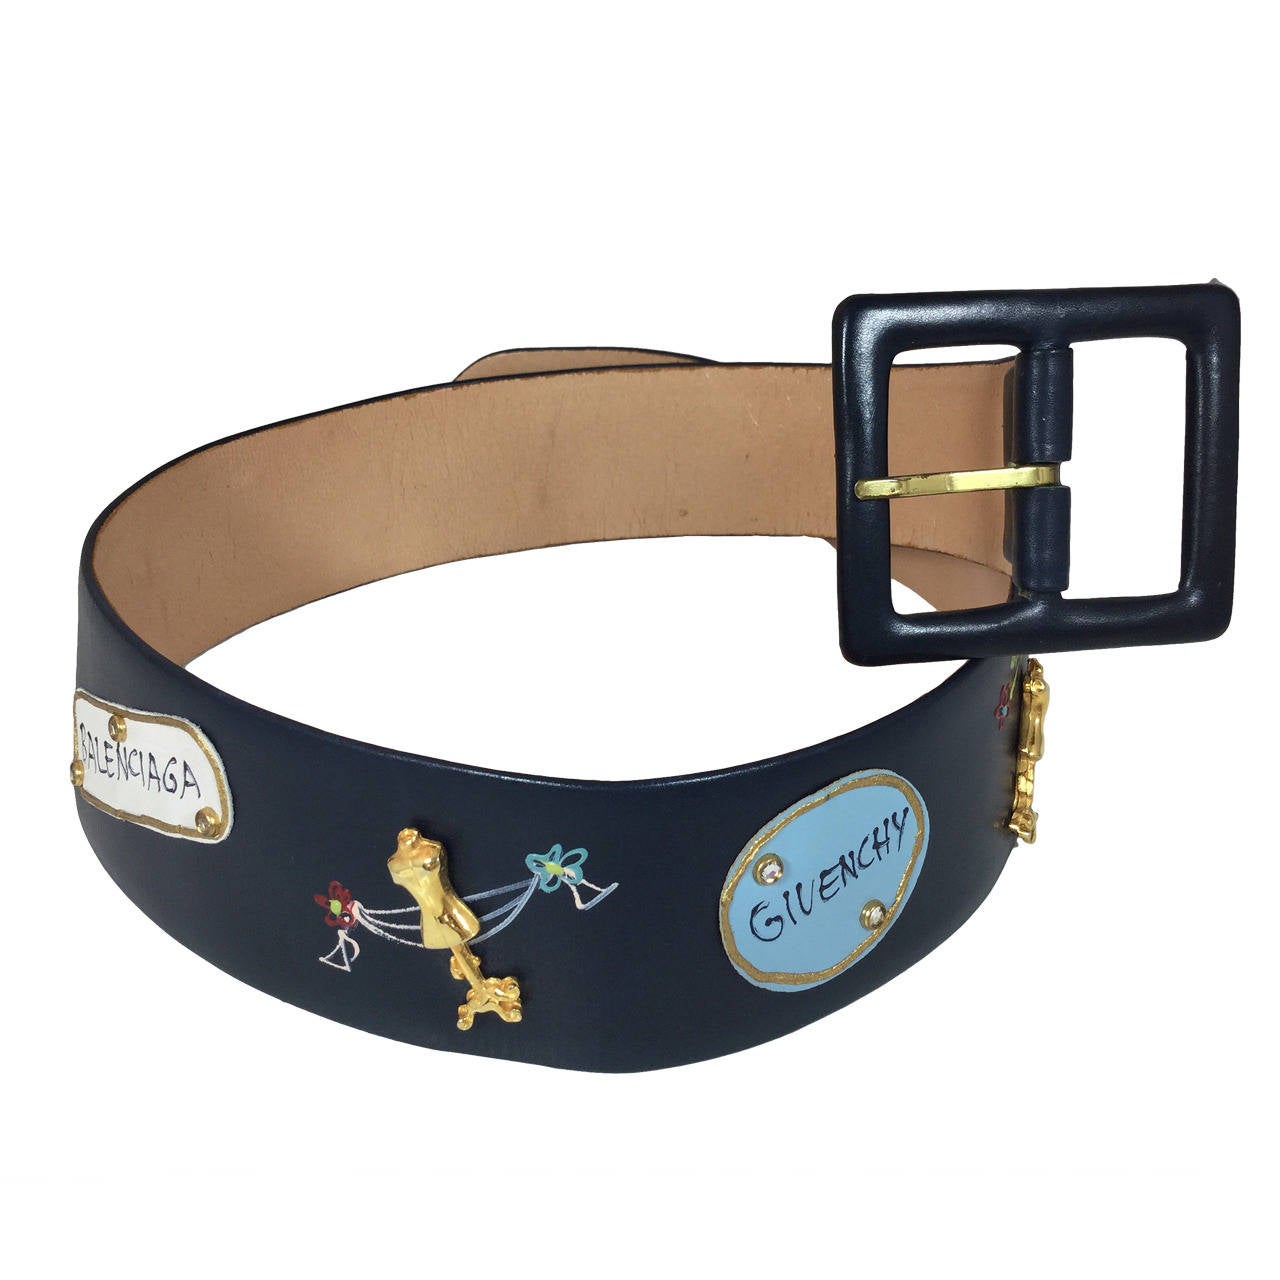 Delightful 1950's Fashion Themed Hand Painted Belt.